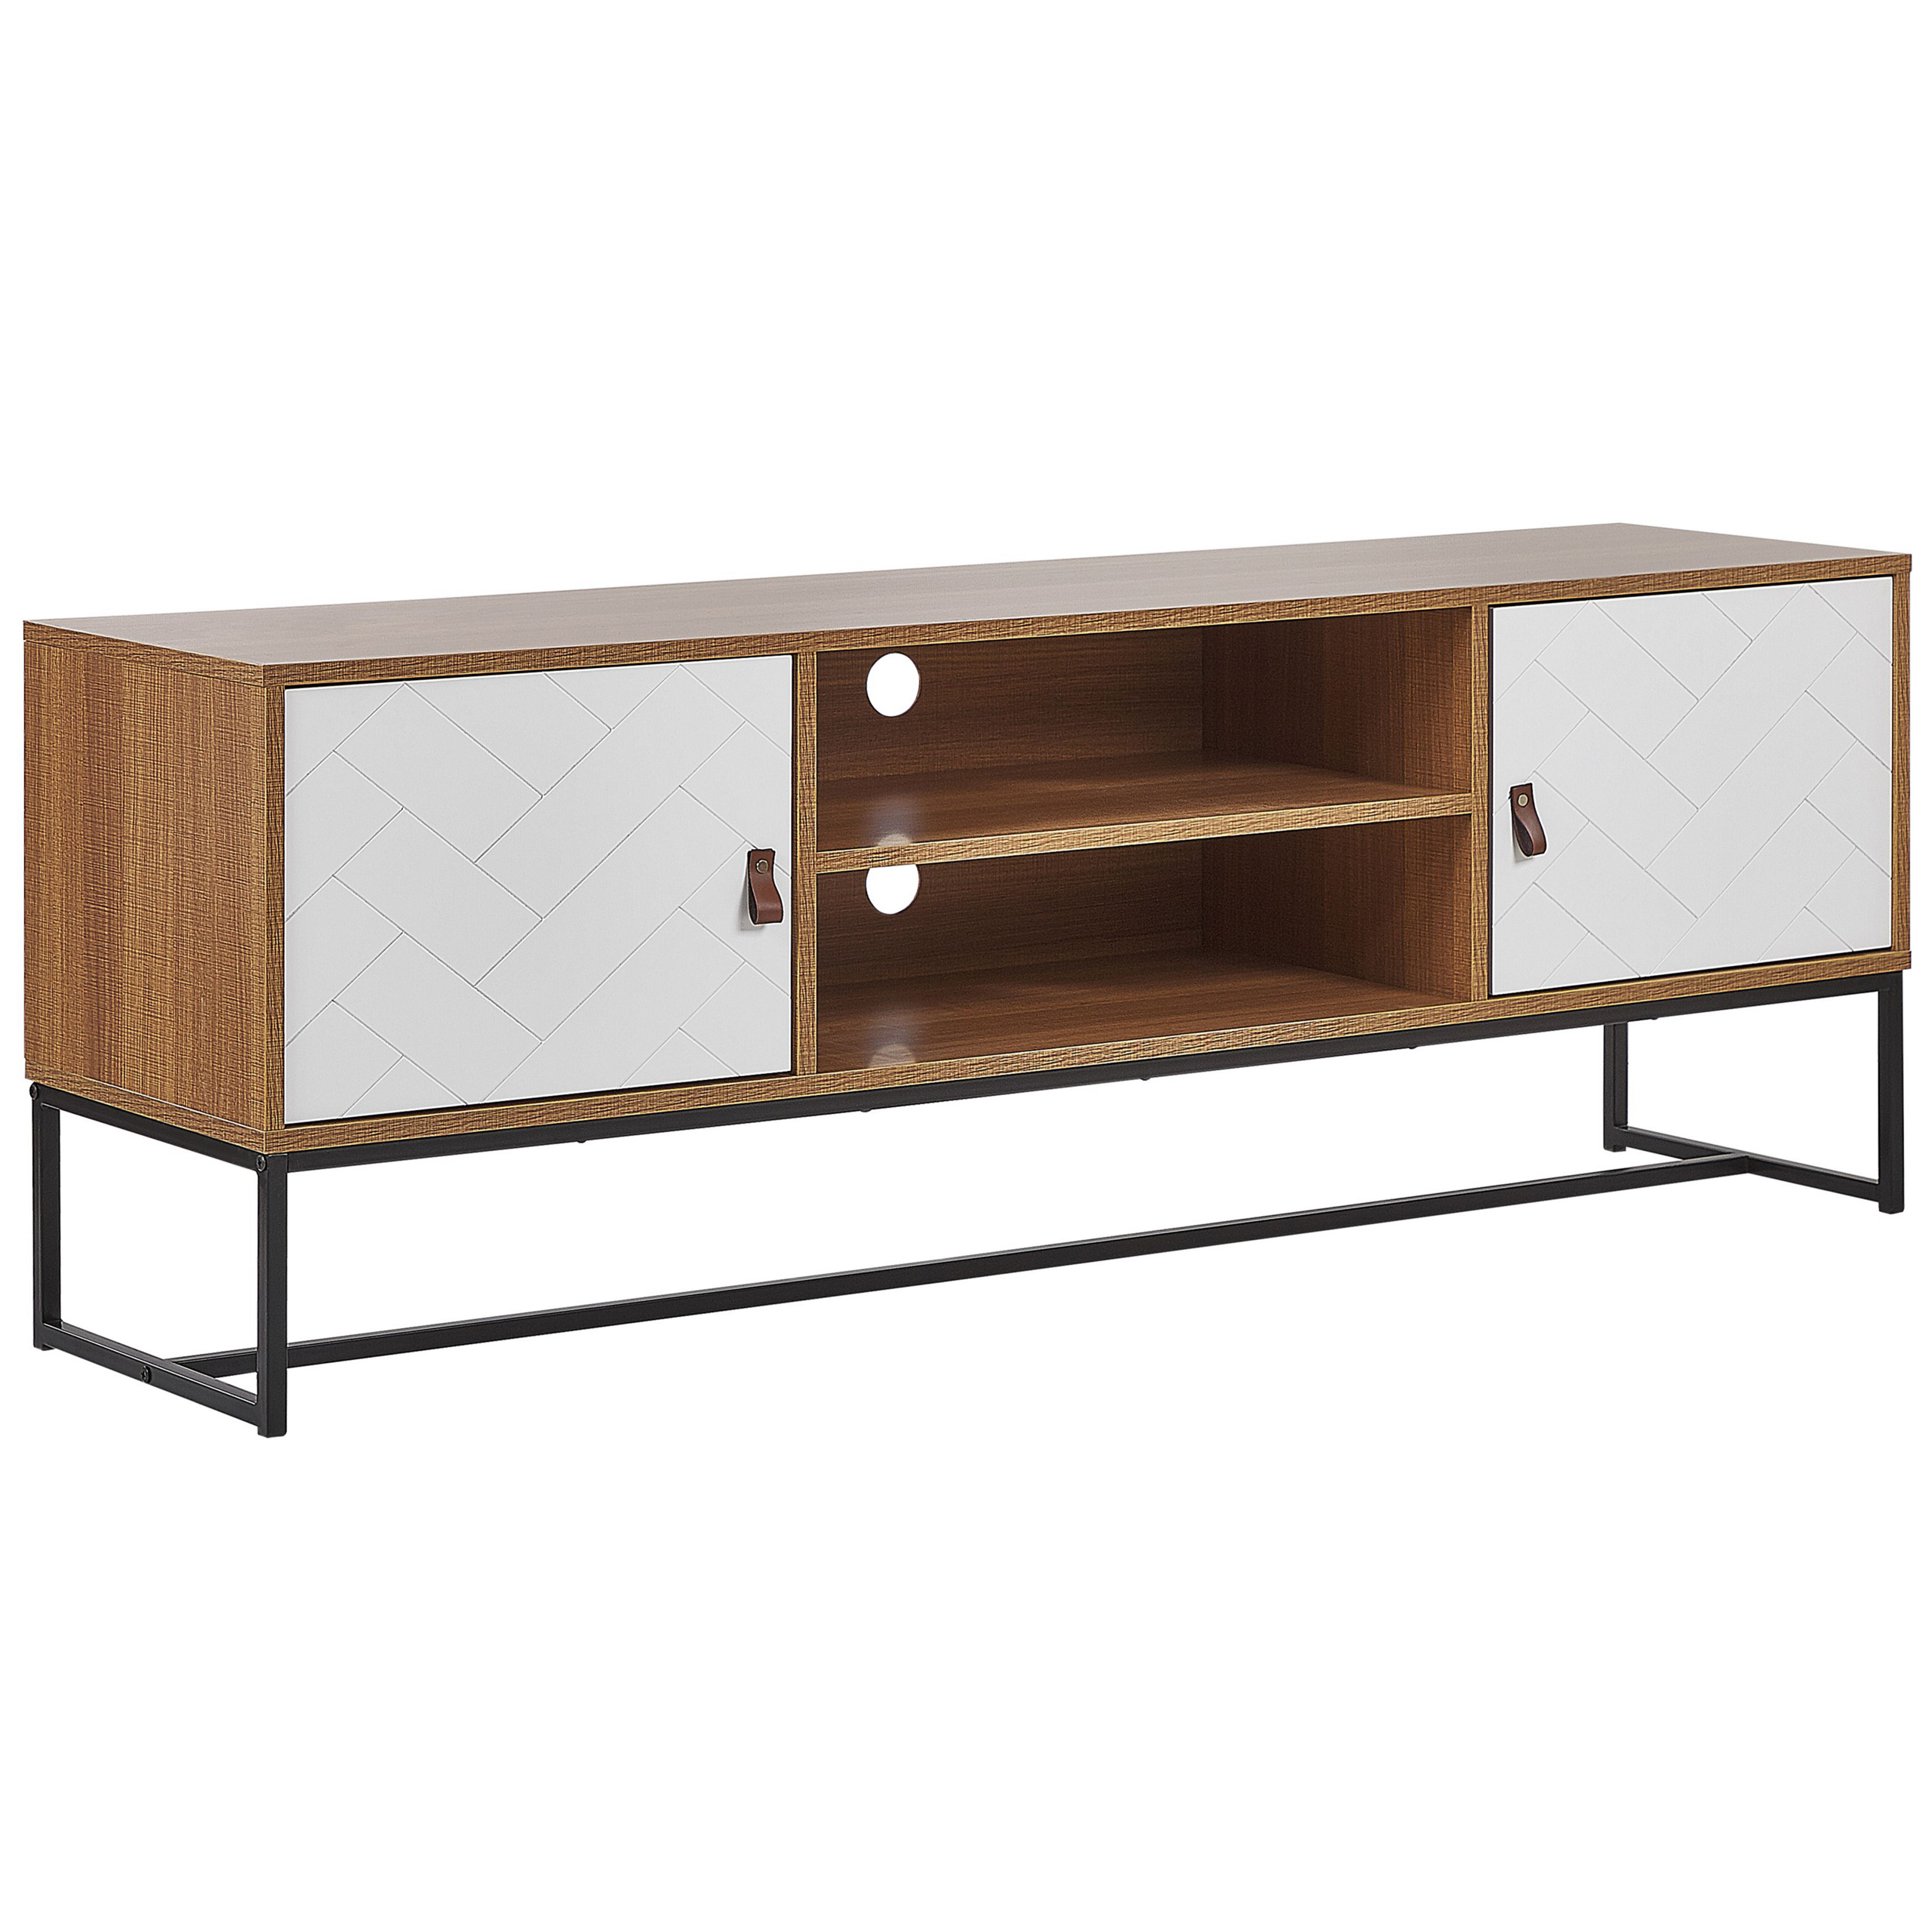 Beliani TV Stand Light Wood with White Metal Legs Rectangular For up to 75ʺ TV Media Unit with Shelves Doors Cable Management Living Room Furniture